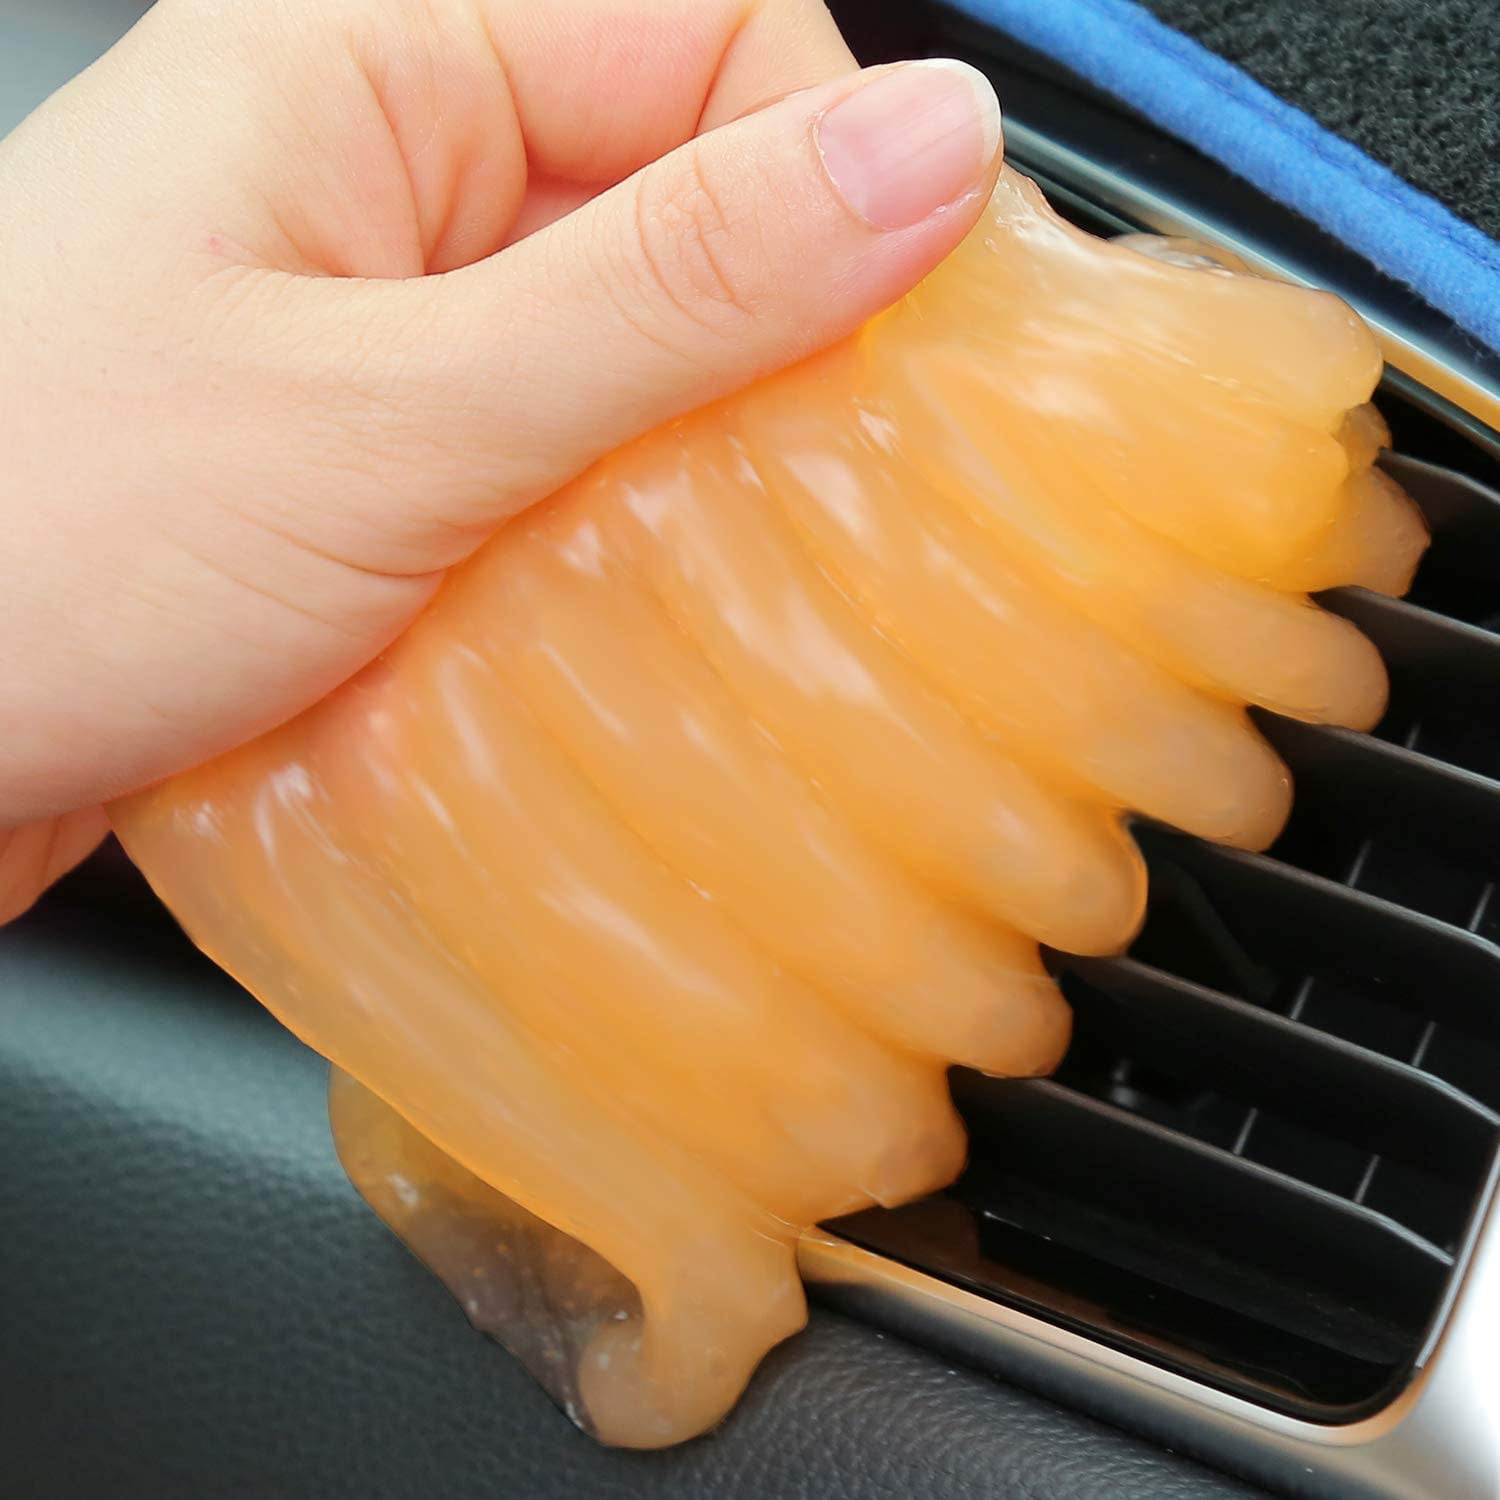 Cleaning Gel PC Printers Cameras Laptops Pink Keyboard Cleaner Universal Dust Car Detail Tools Cleaning Gel Dirt Bacteria Cleaner Automotive Dust Air Vent Interior Removal Putty for Car Vents 